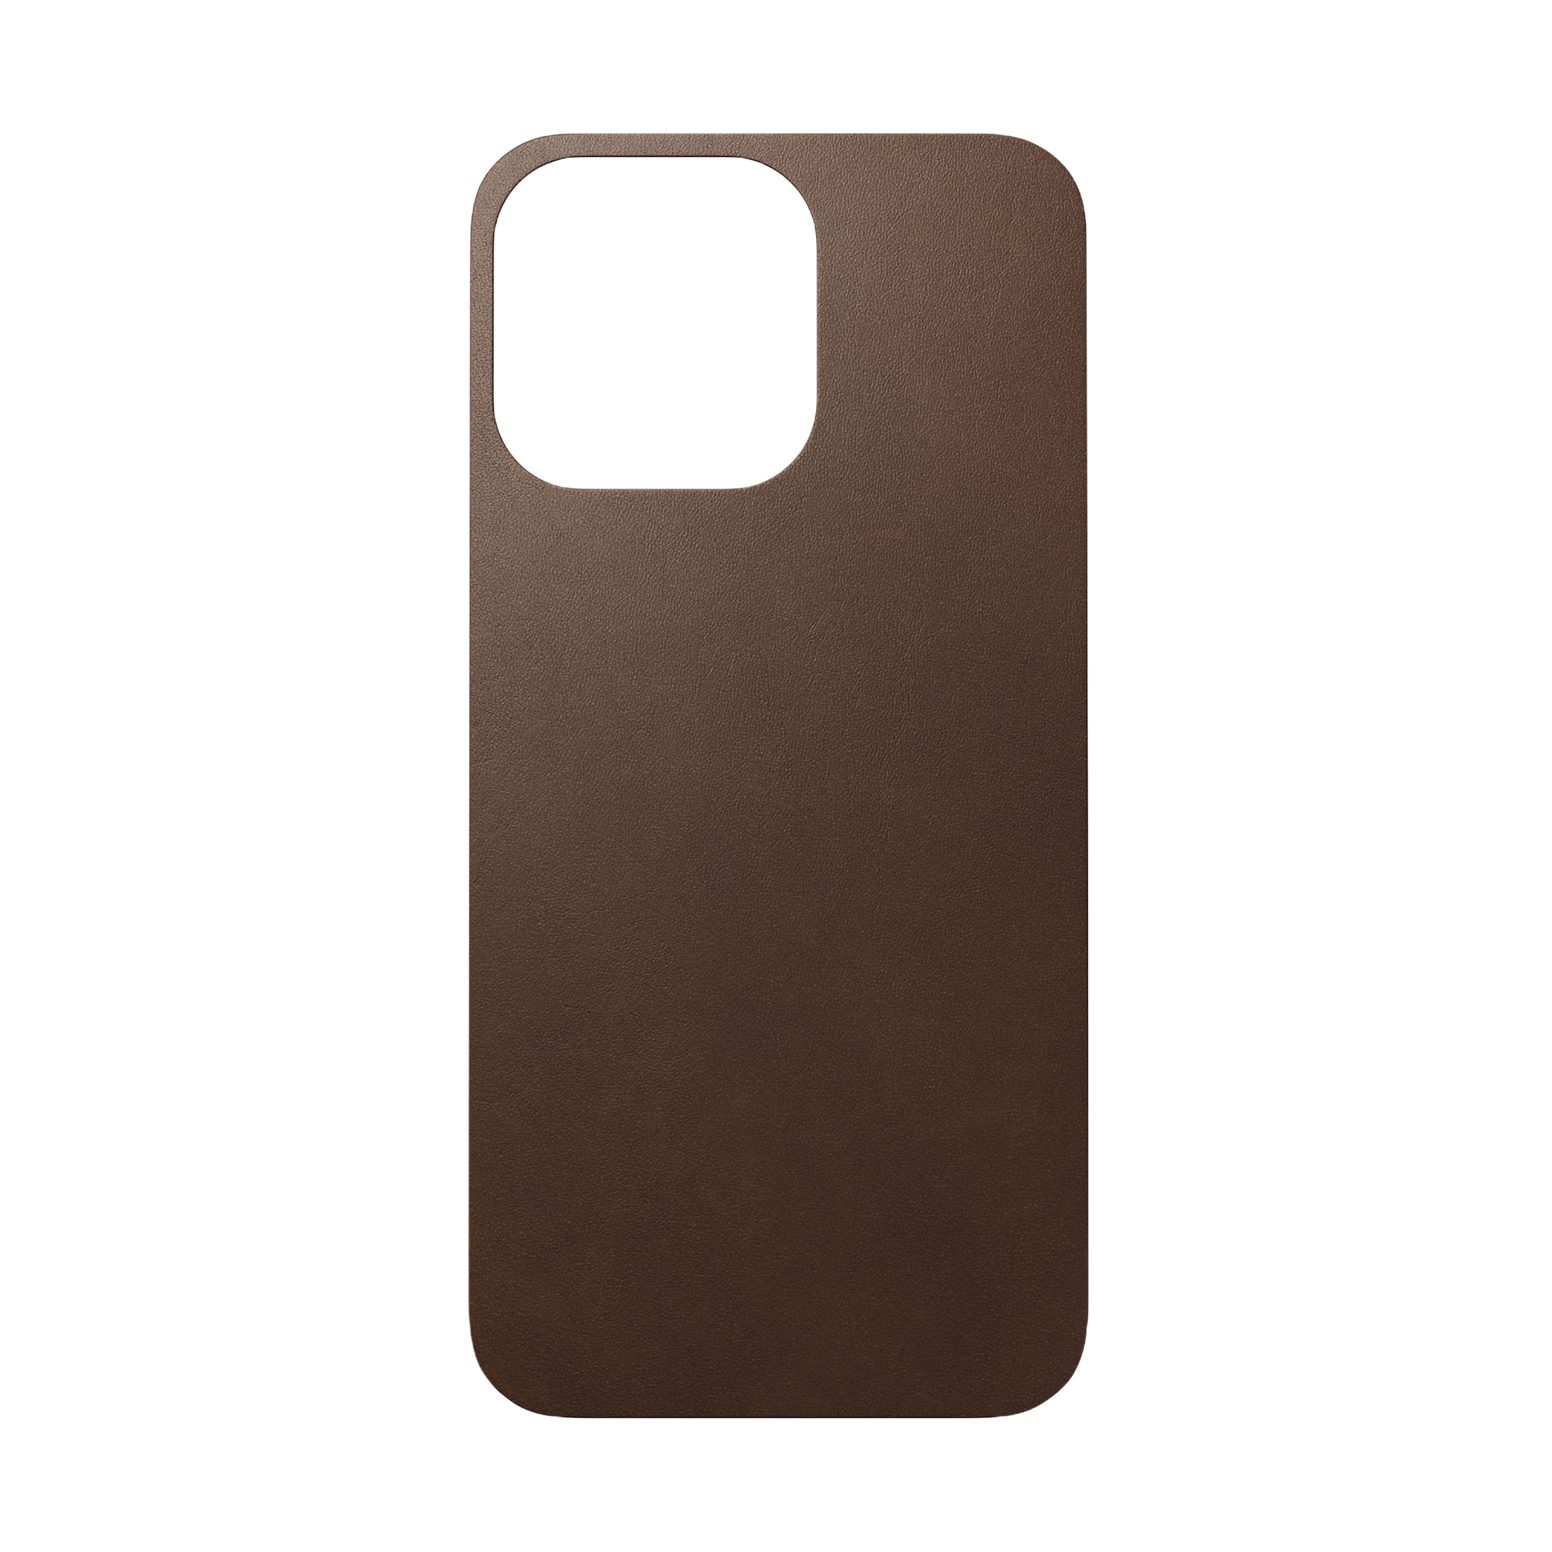 Nomad Skin with Horween Leather for iPhone 13 Pro - Rustic Brown - Discontinued